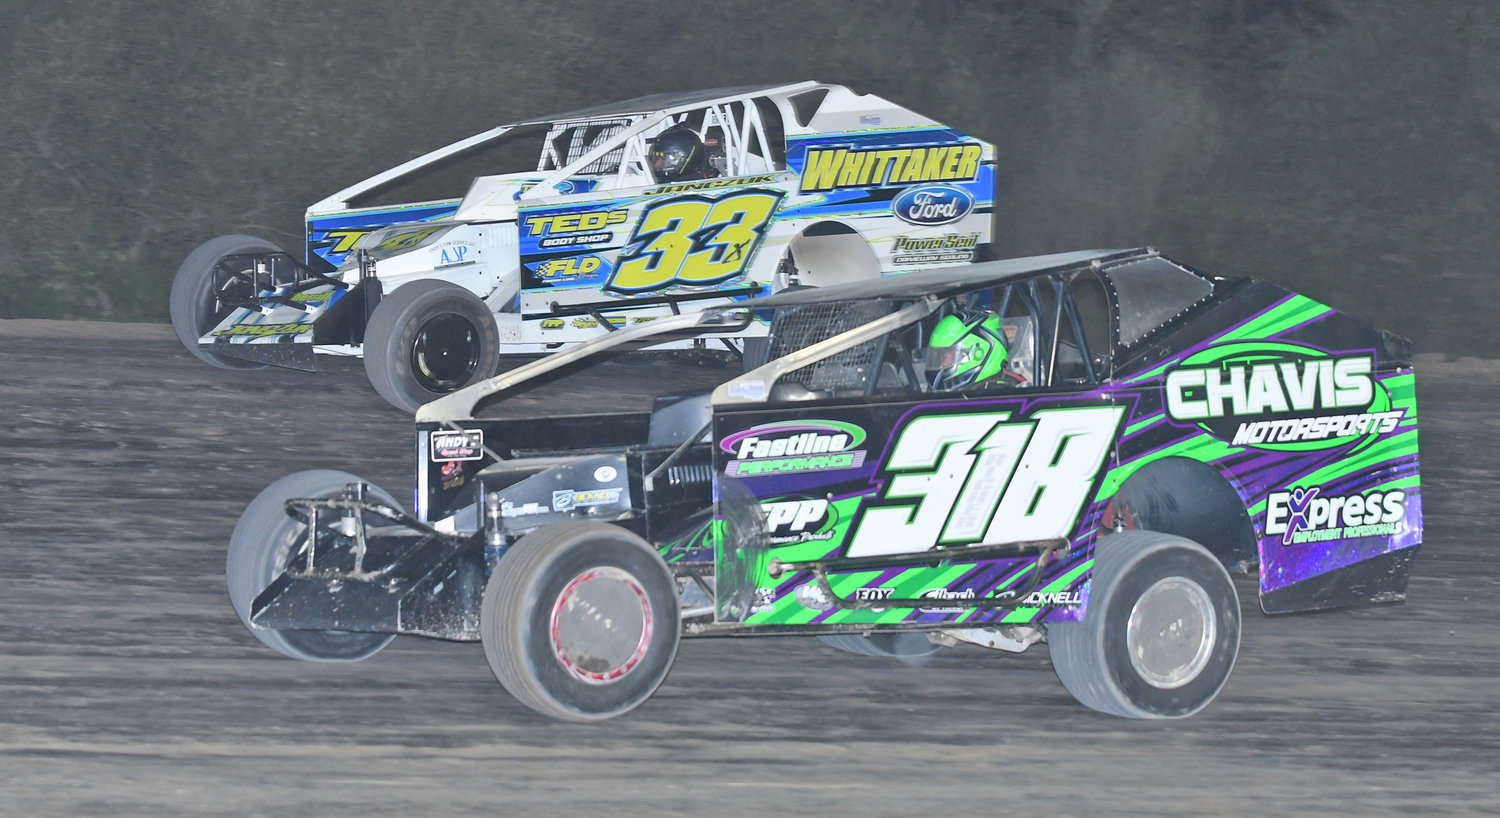 Durhamville's Matt Janczuk, in the no. 33xm uses the high side of turn four to pass Dave Richer on his way to winning the 25-lap sportsman New Yorker feature Sunday night and in doing so Jancauk won his 12th feature race at Utica-Rome Speedway in 2022.